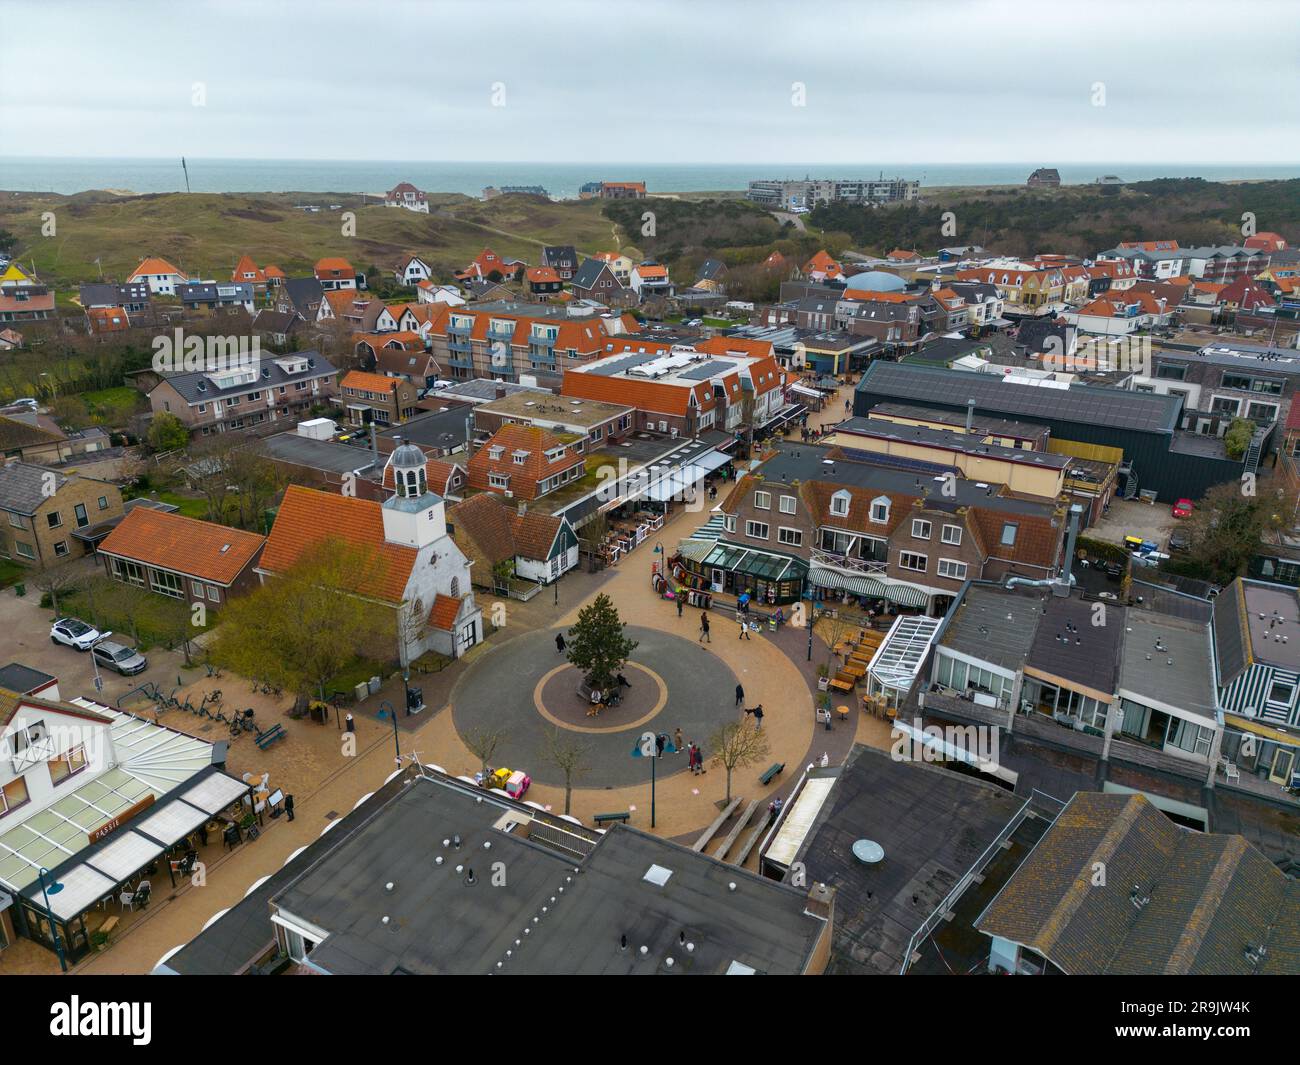 Aerial drone photo of the town square and church in de Koog. De Koog is a town on the island of Texel, Wadden sea the Netherlands Stock Photo